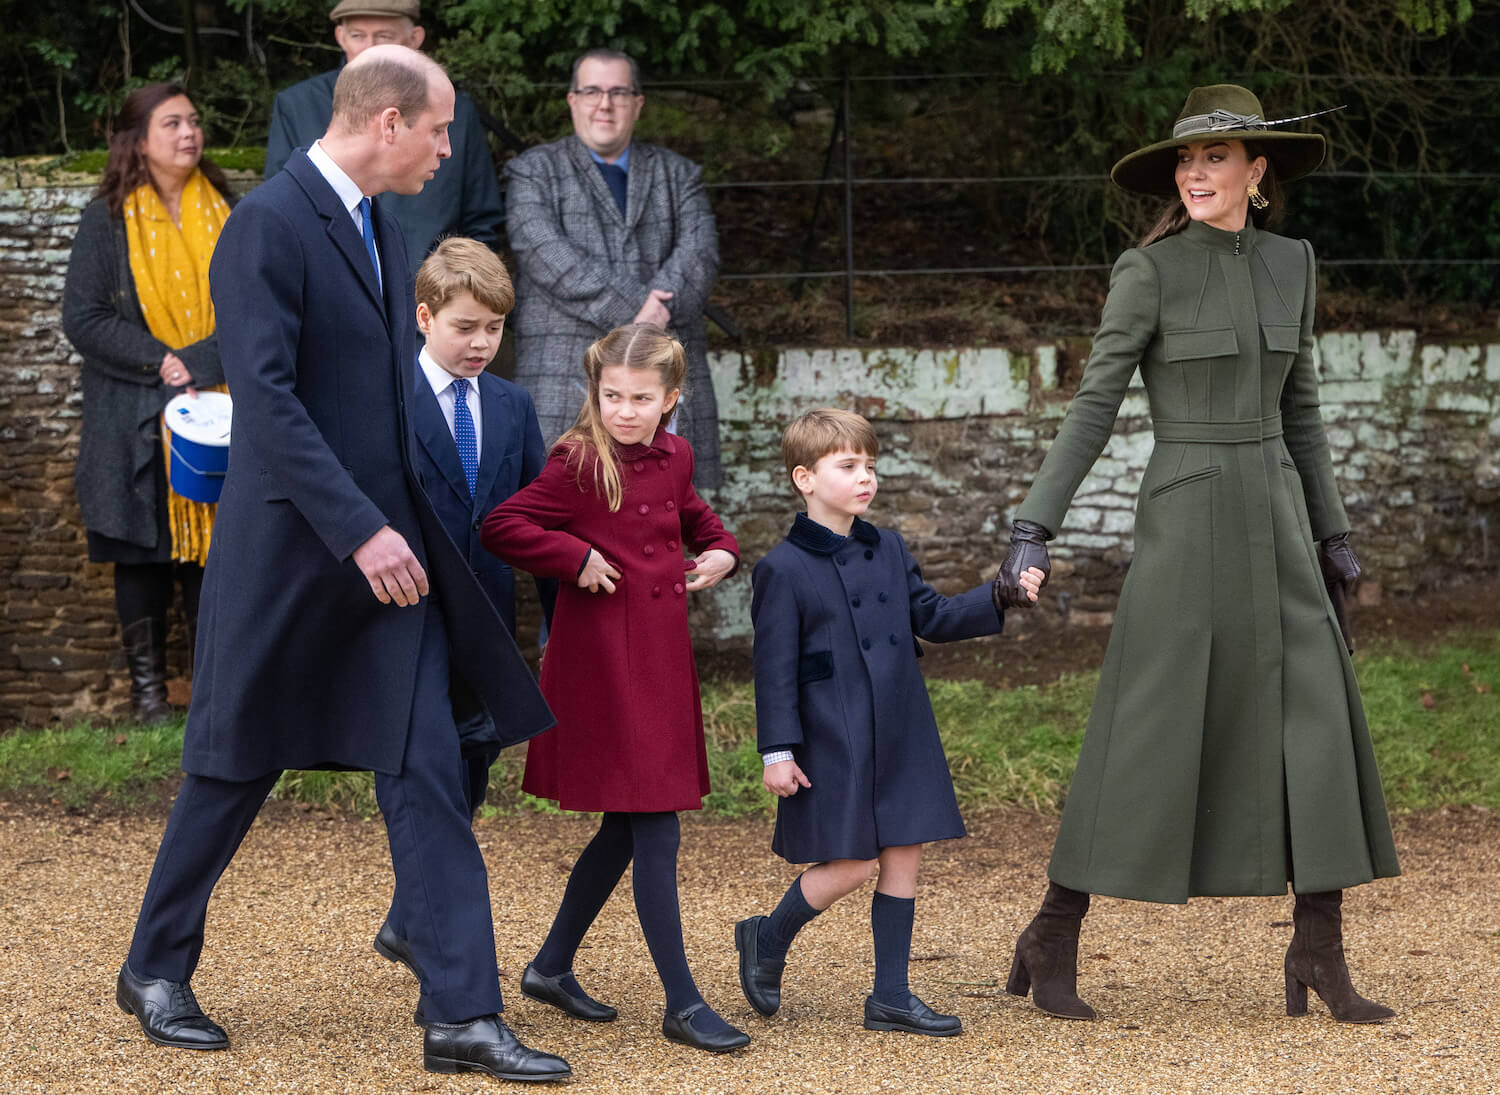 Prince William and Kate Middleton walk with their children outside